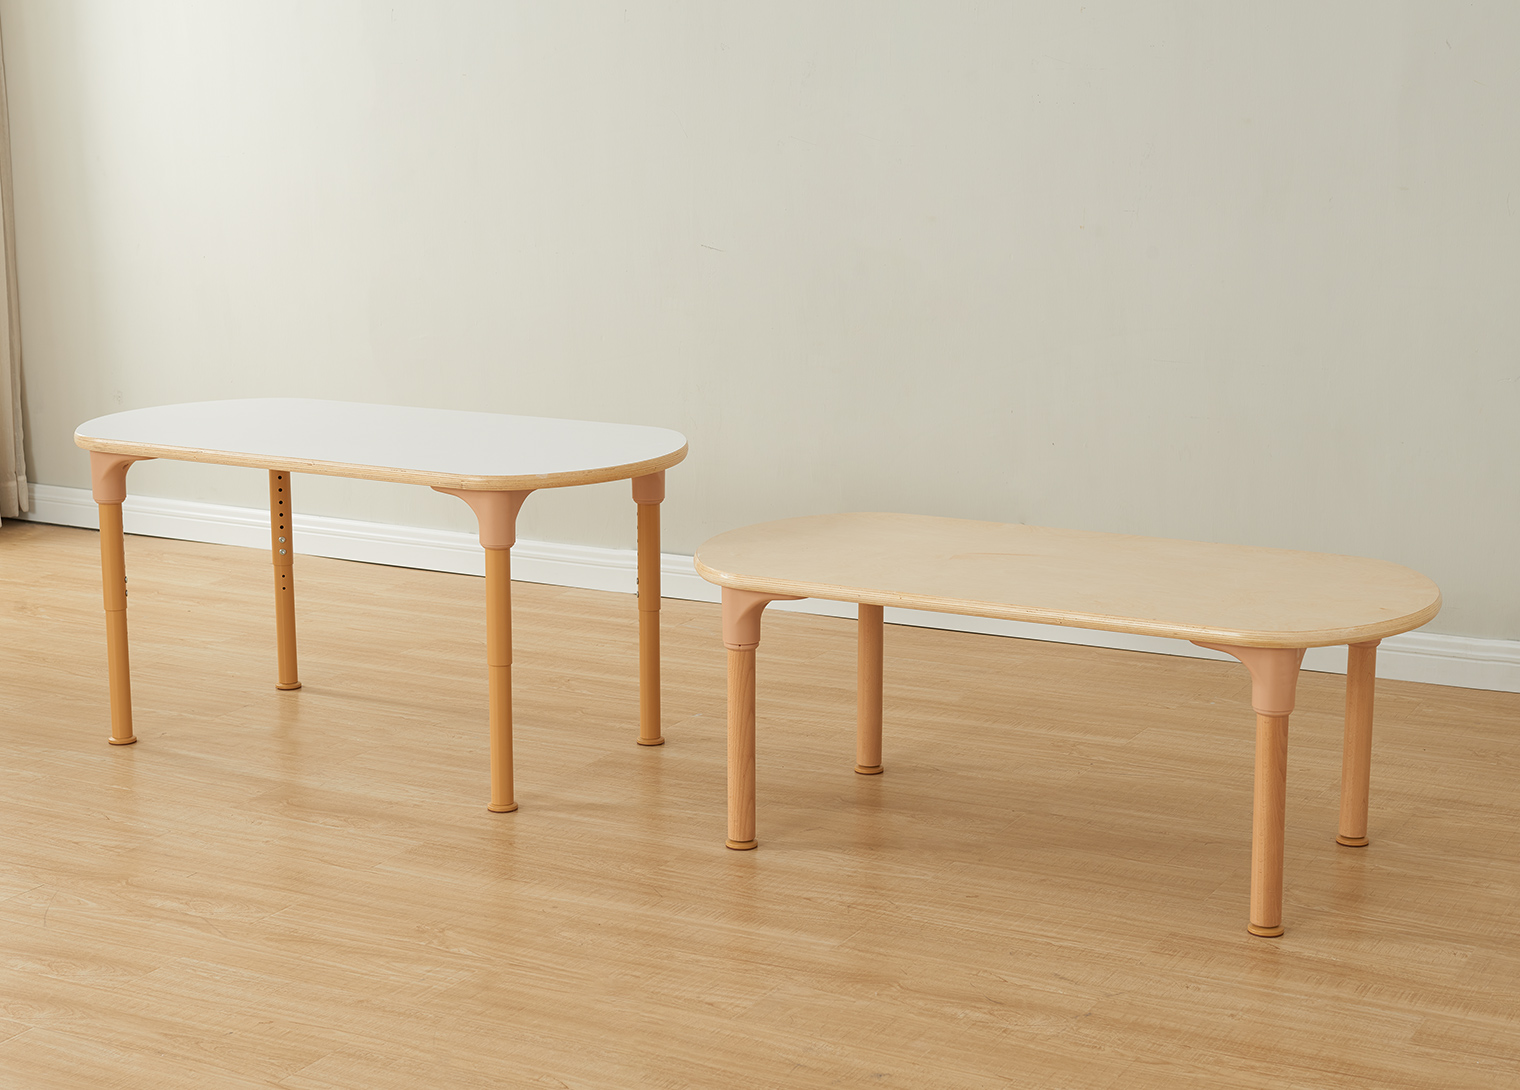 Alrik System - 535H Oval-Shaped Table (Clear Varnish)